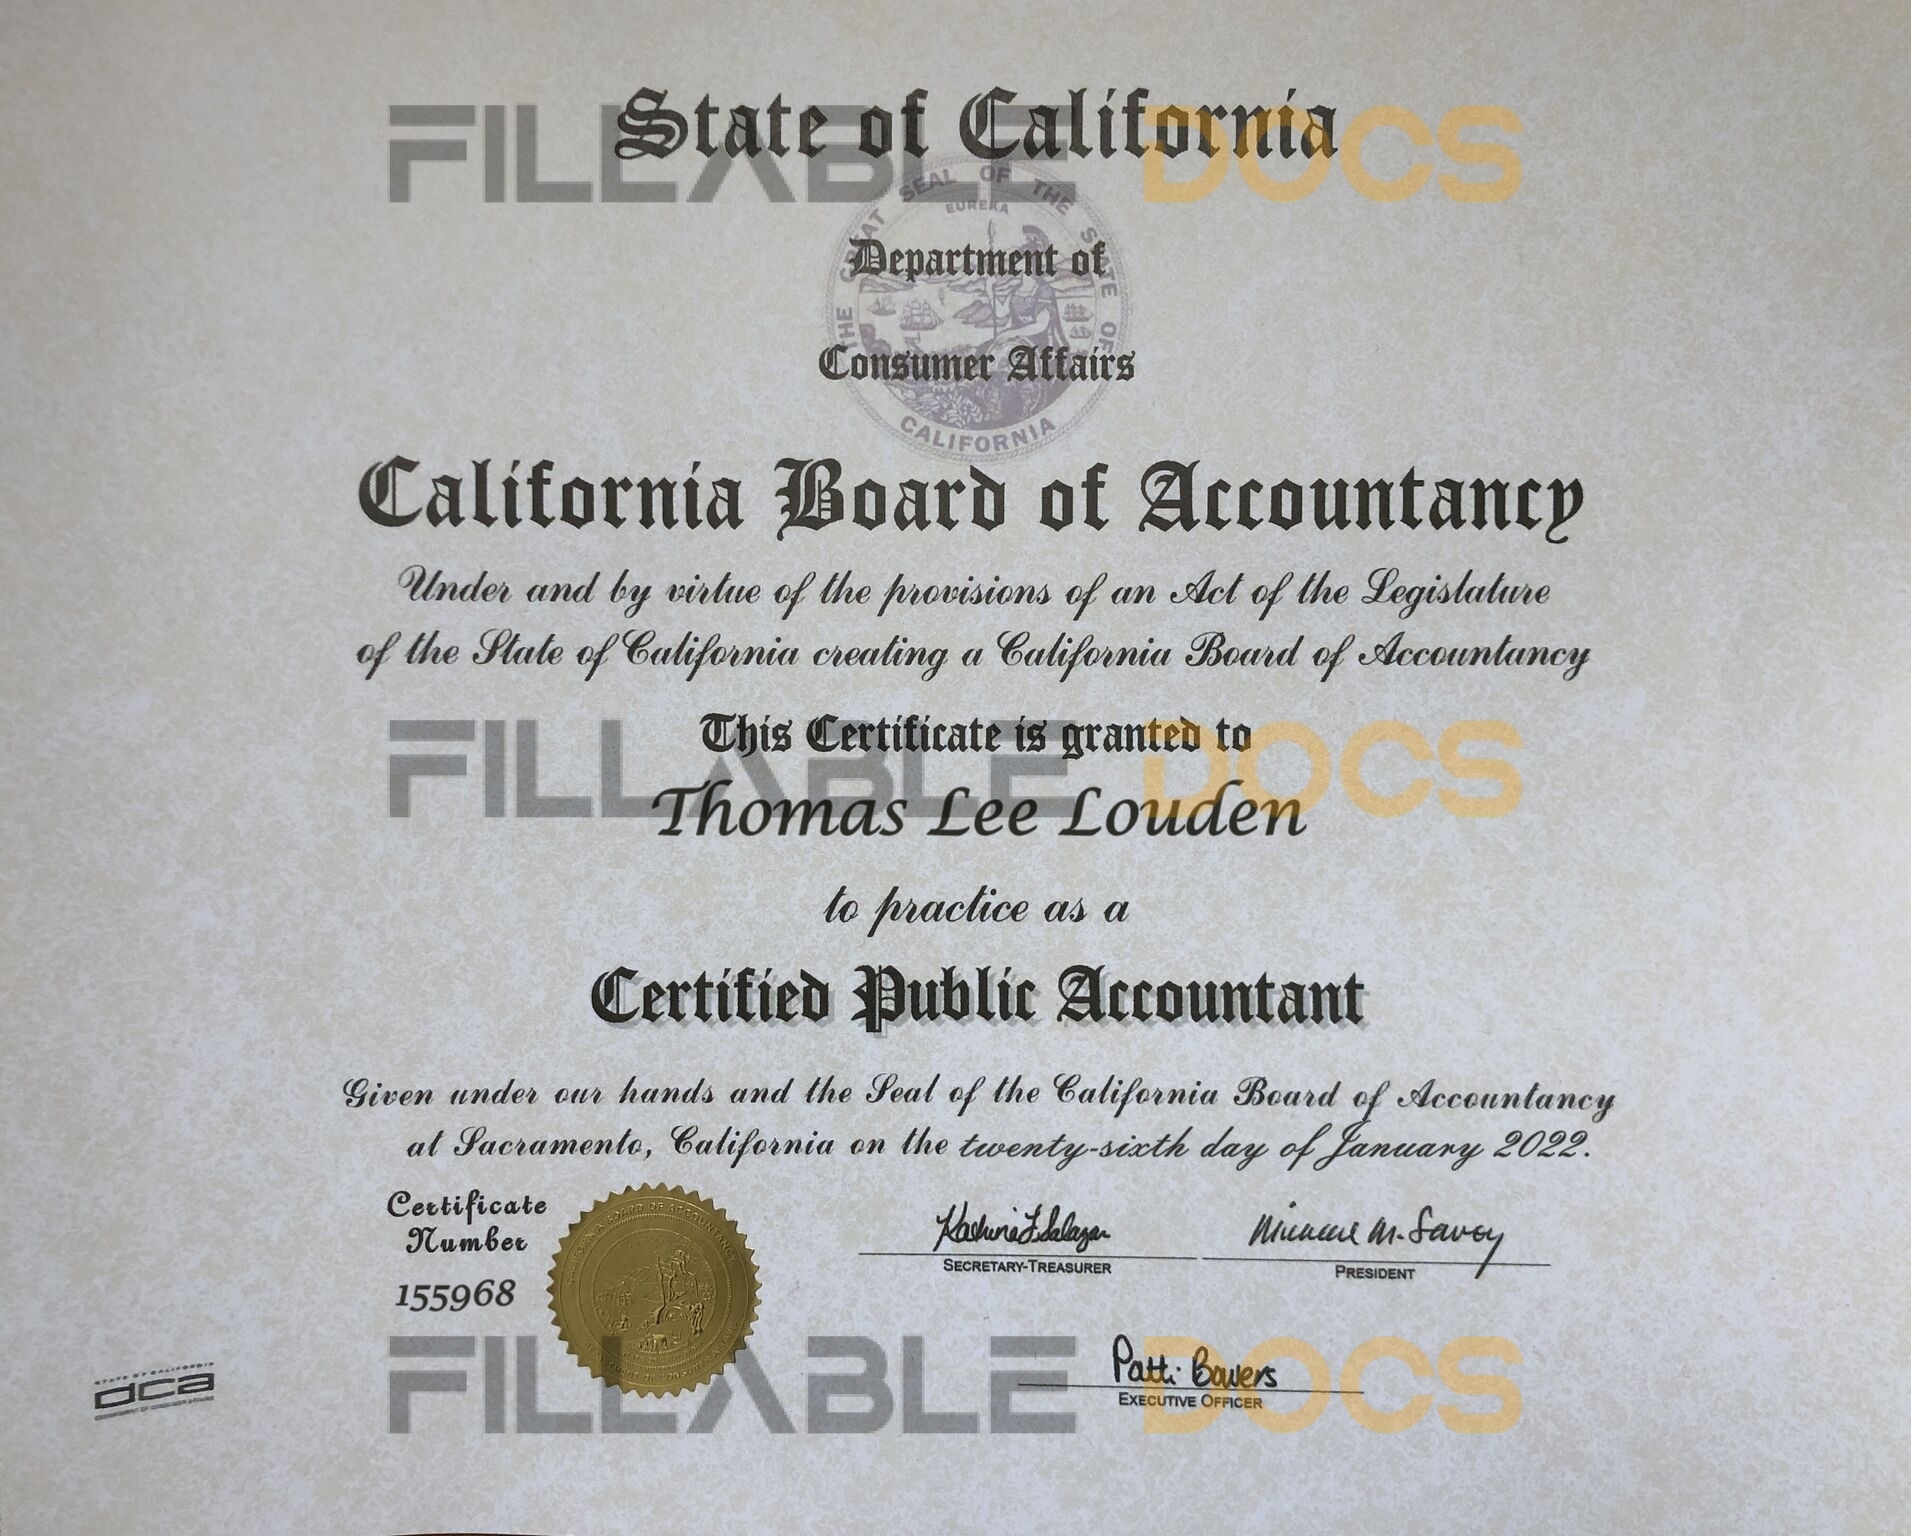 Authentic-Looking Fake certificate from California Board of Accountancy